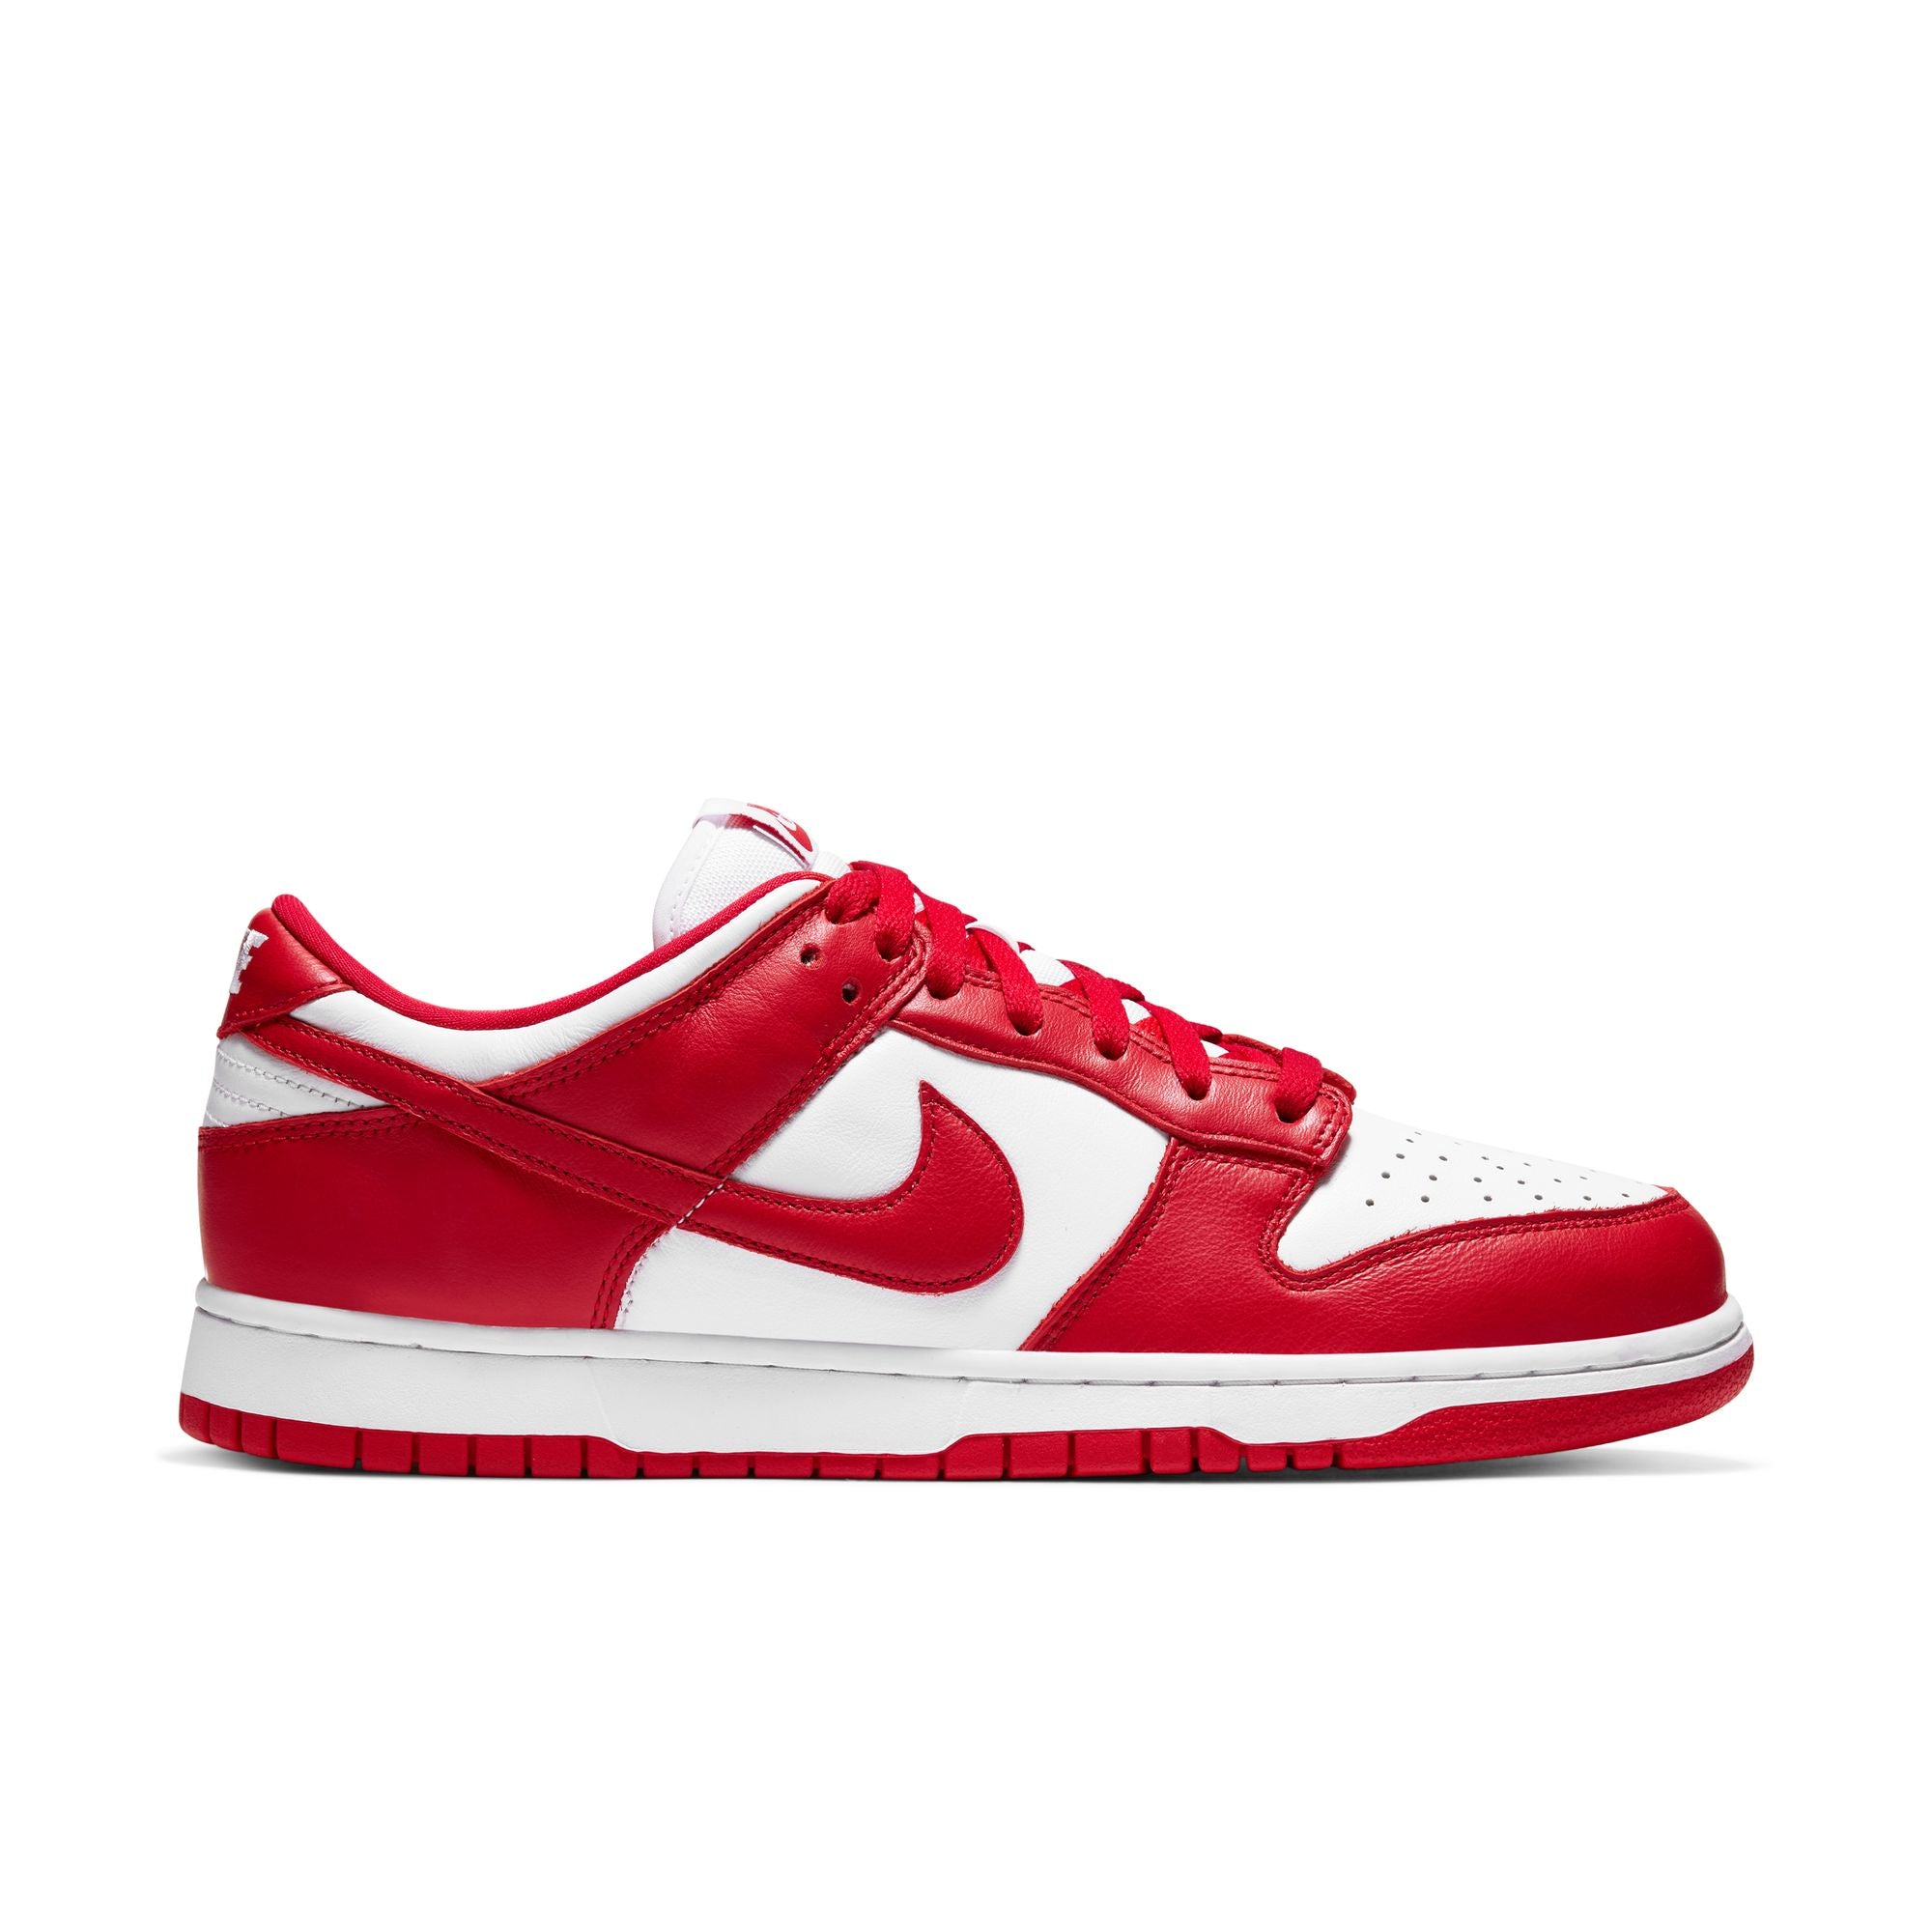 NIKE - Nike Dunk Low Sp - (White/University Red) view 6